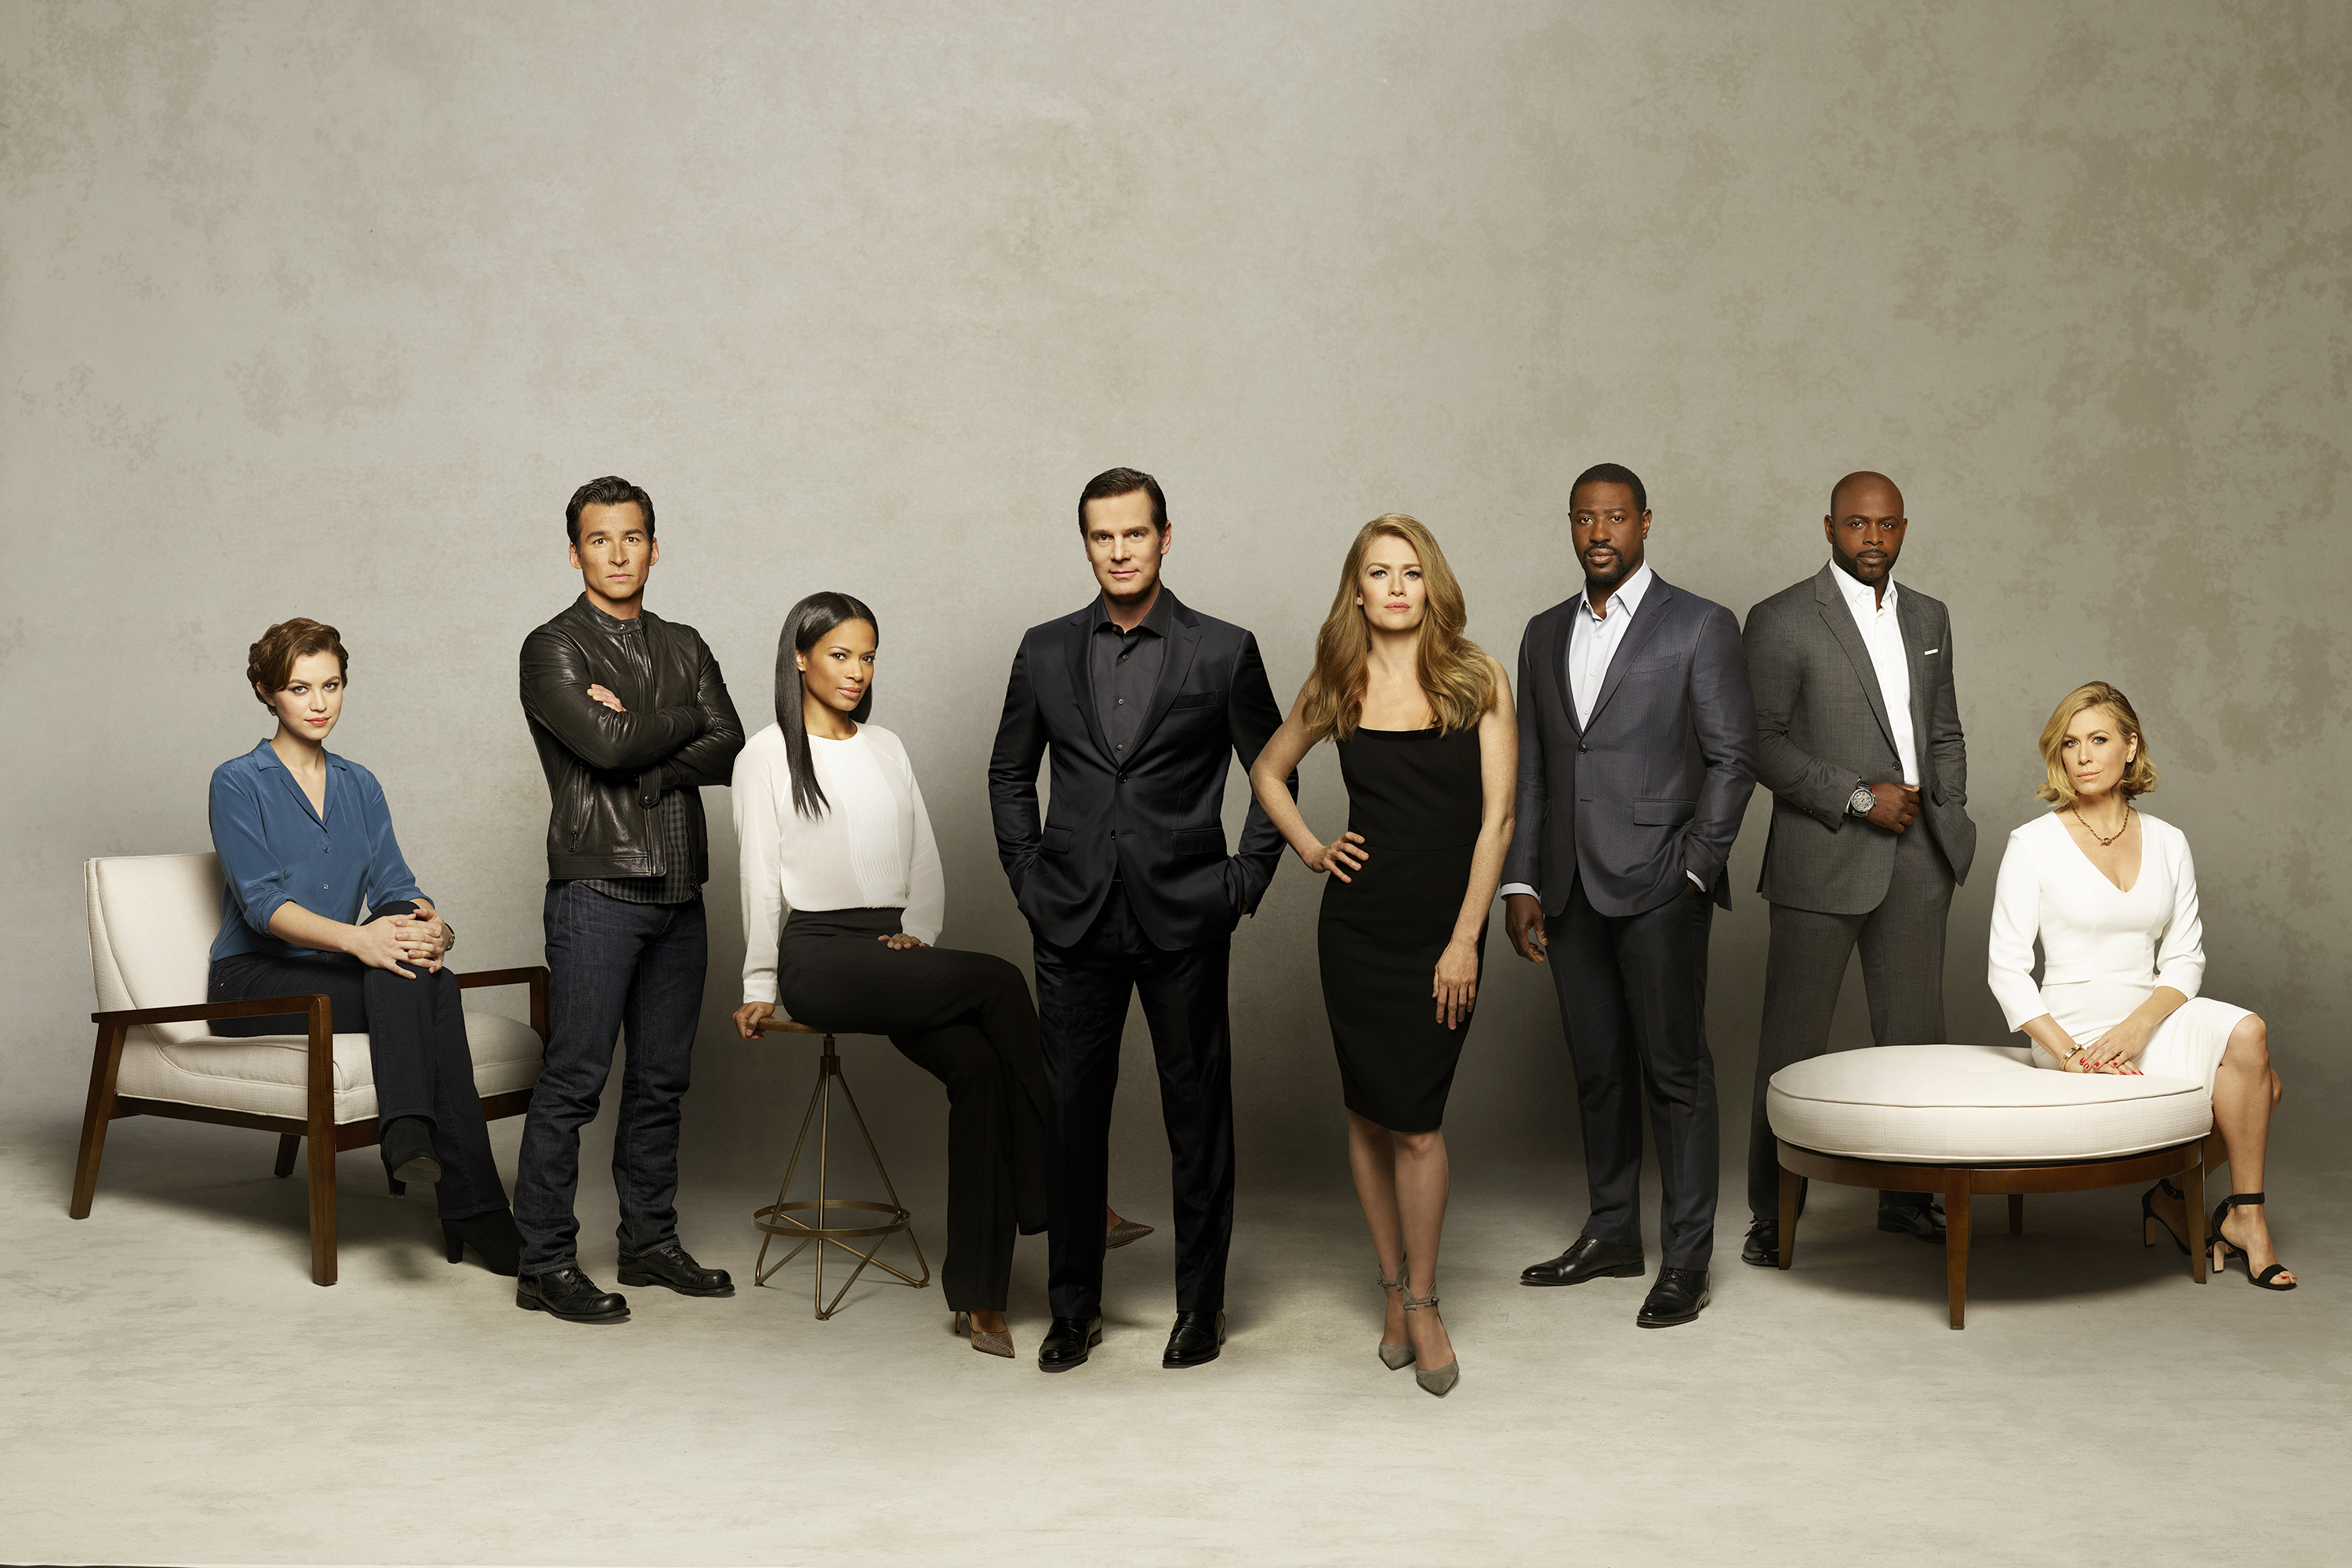 The Catch Review: Shonda Rhimes' New Show Fails on Casting | Time